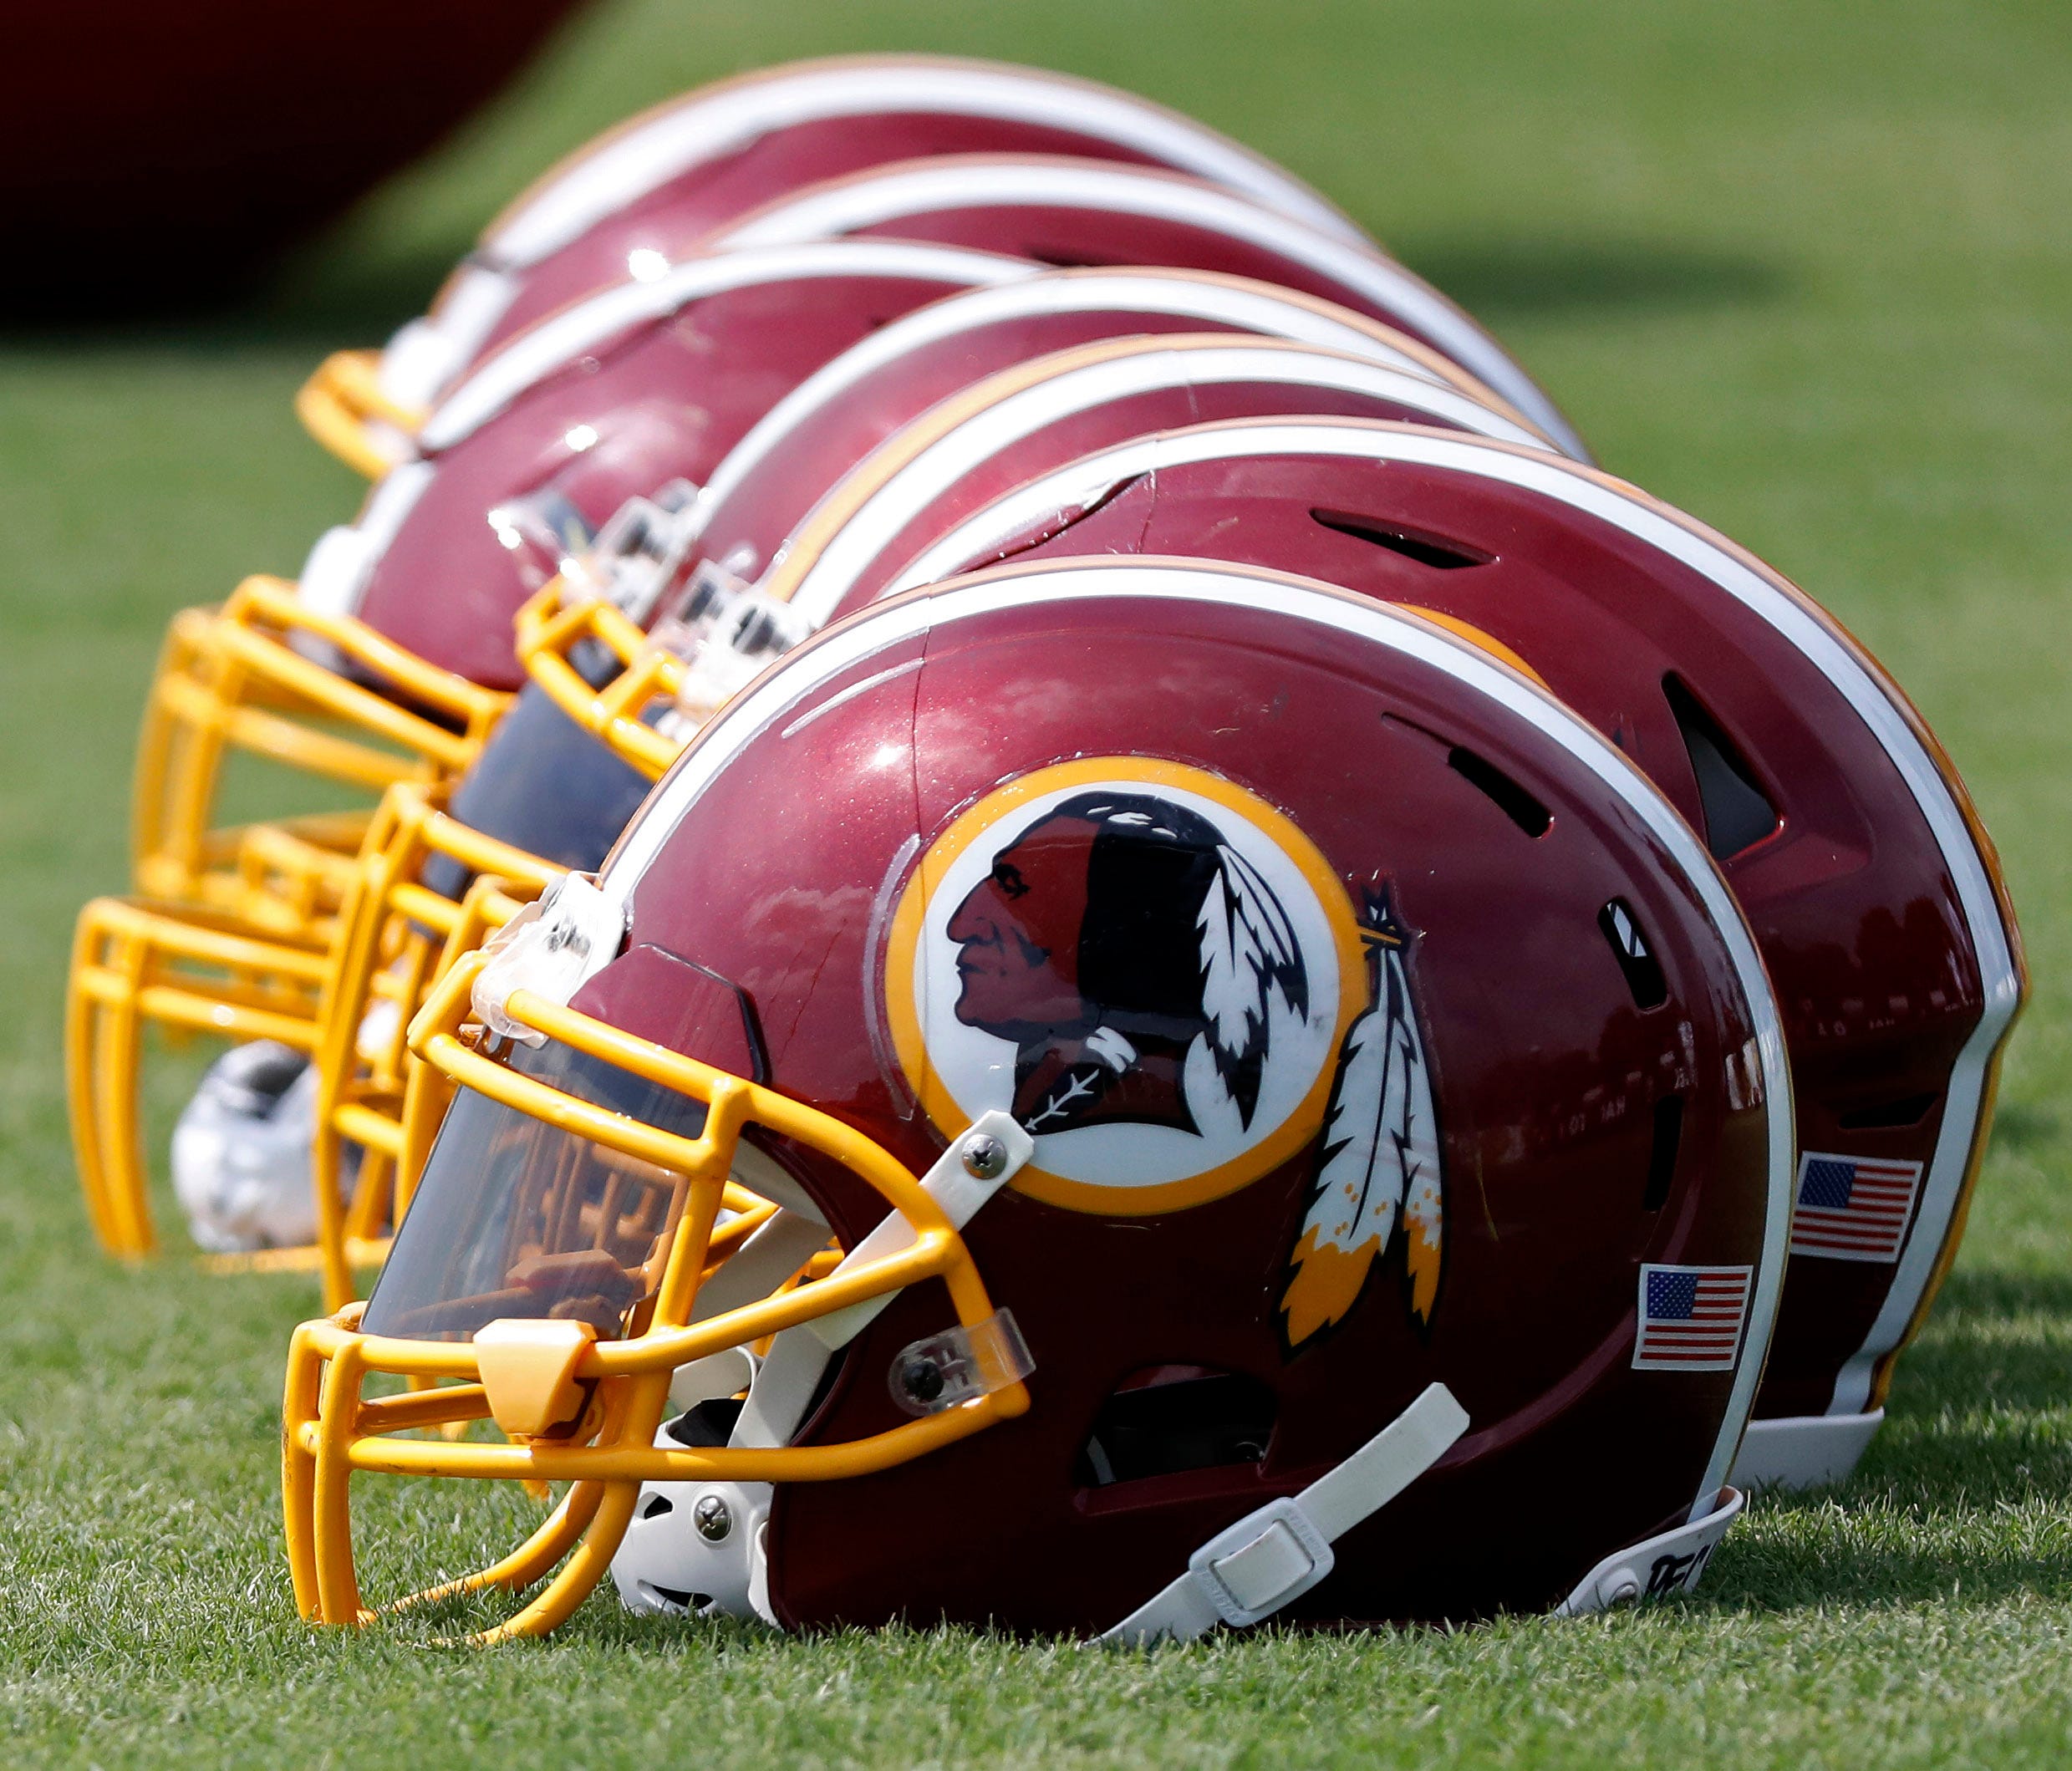 Washington Redskins players' helmets rest on the field during training camp.